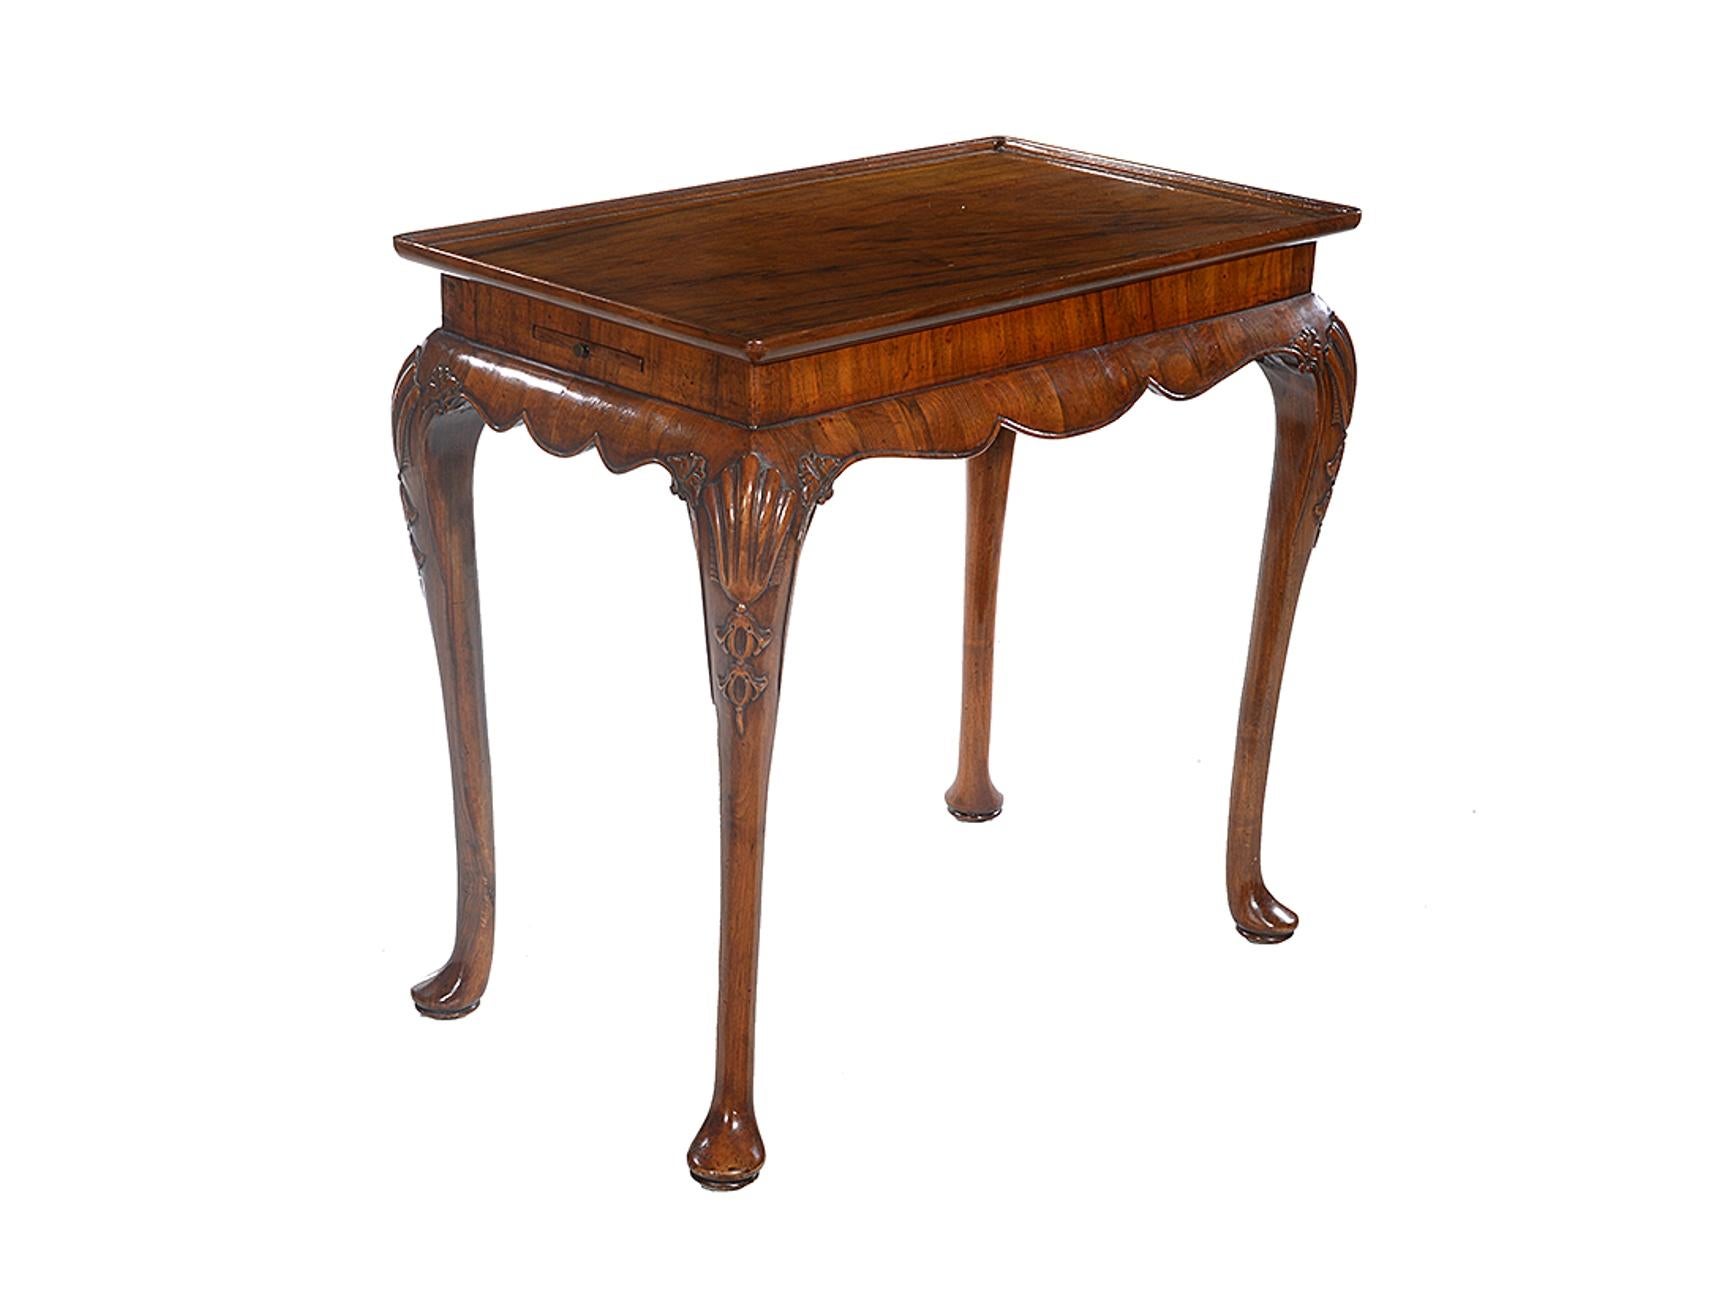 A 19th century walnut sliver table, the dished top with a wrap around scalloped skirt and to each side, a pull out slide.

The cabriole legs, with shell and bell flower carving to the knees, end on pad feet.